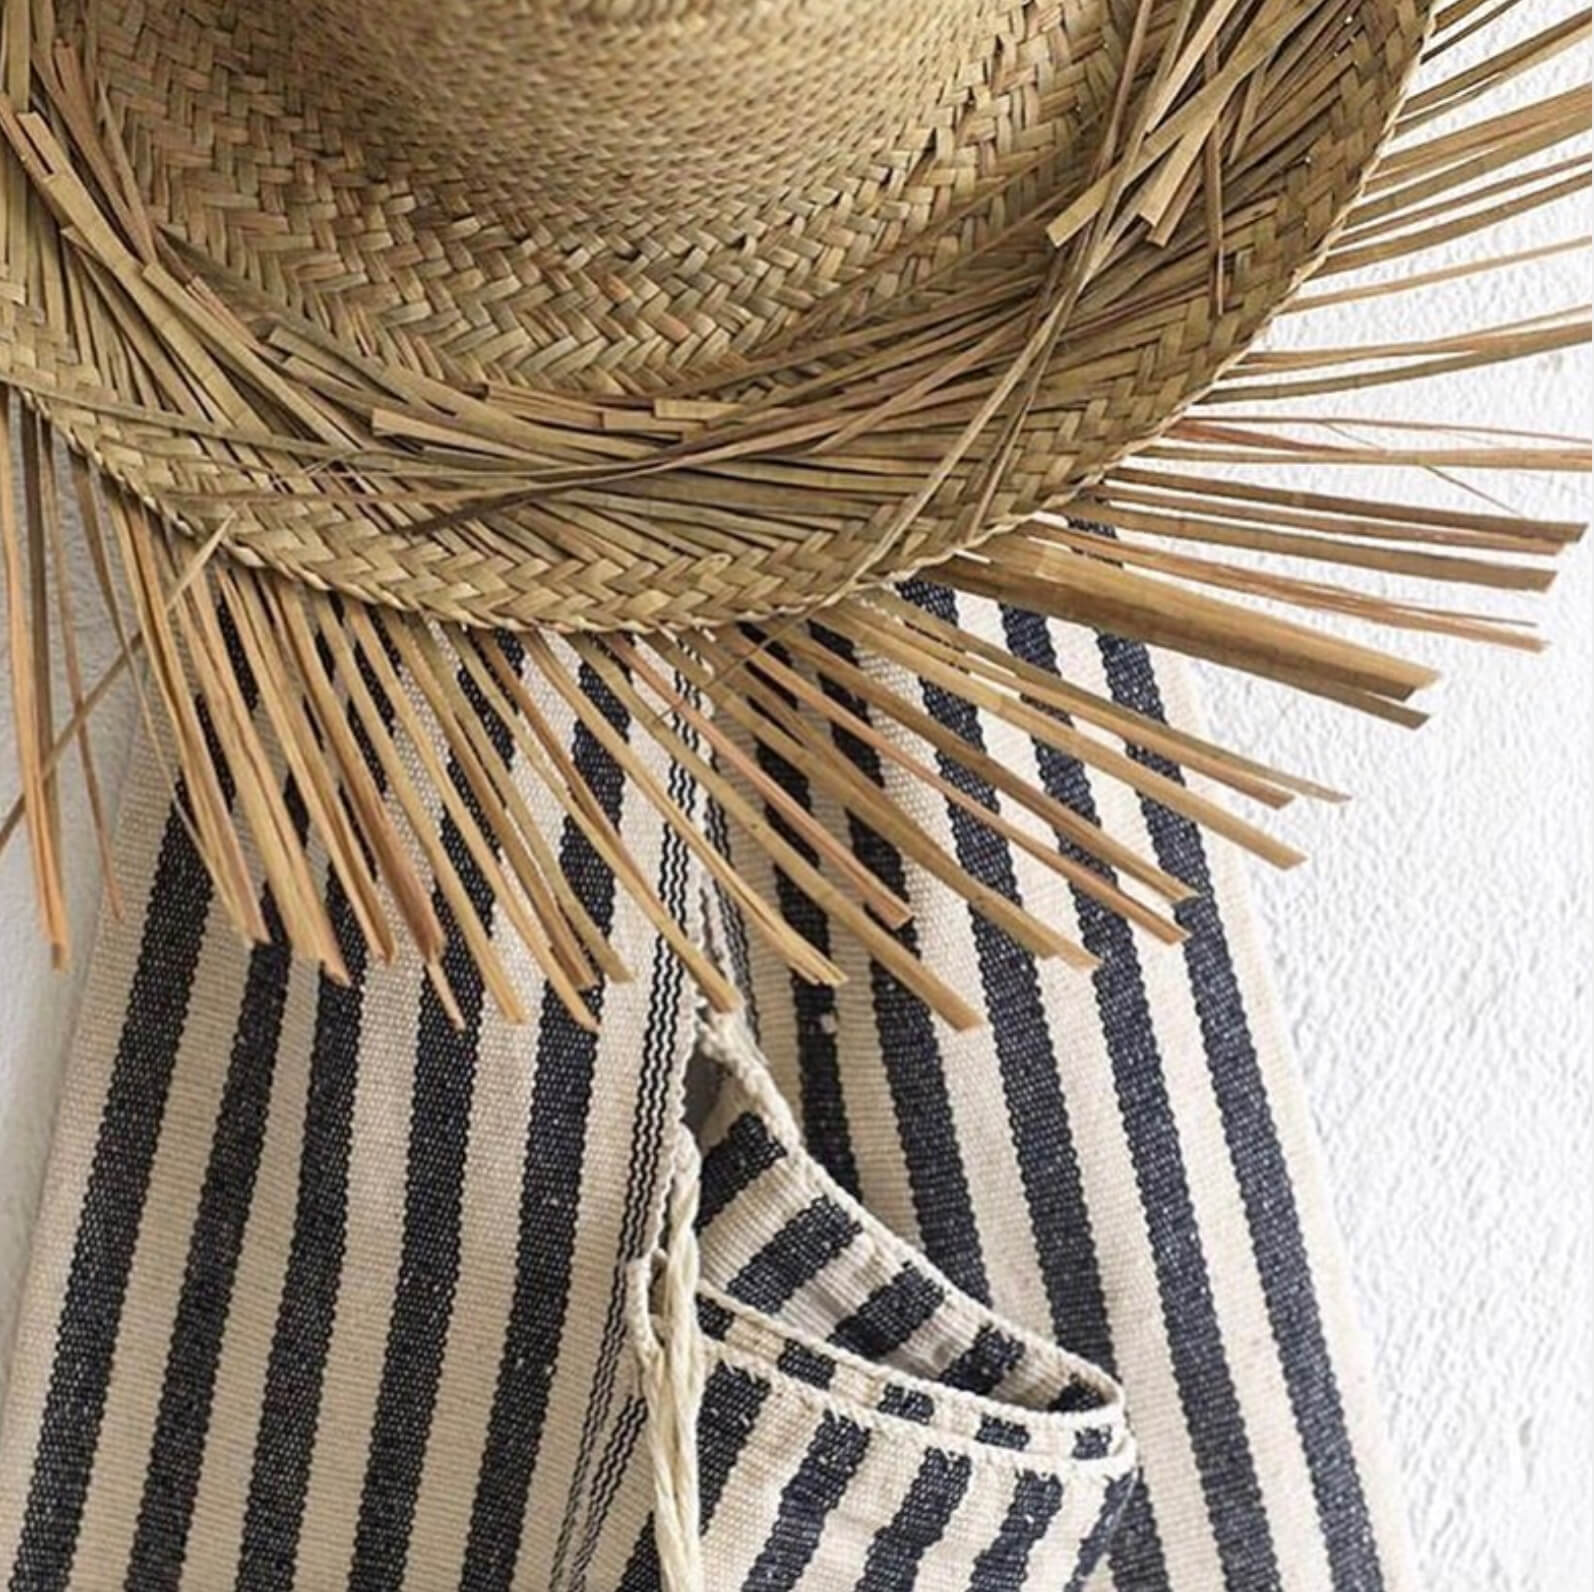 A straw hat and a Karen handwoven cotton shoulder bag. Keeping it stylish yet simple.